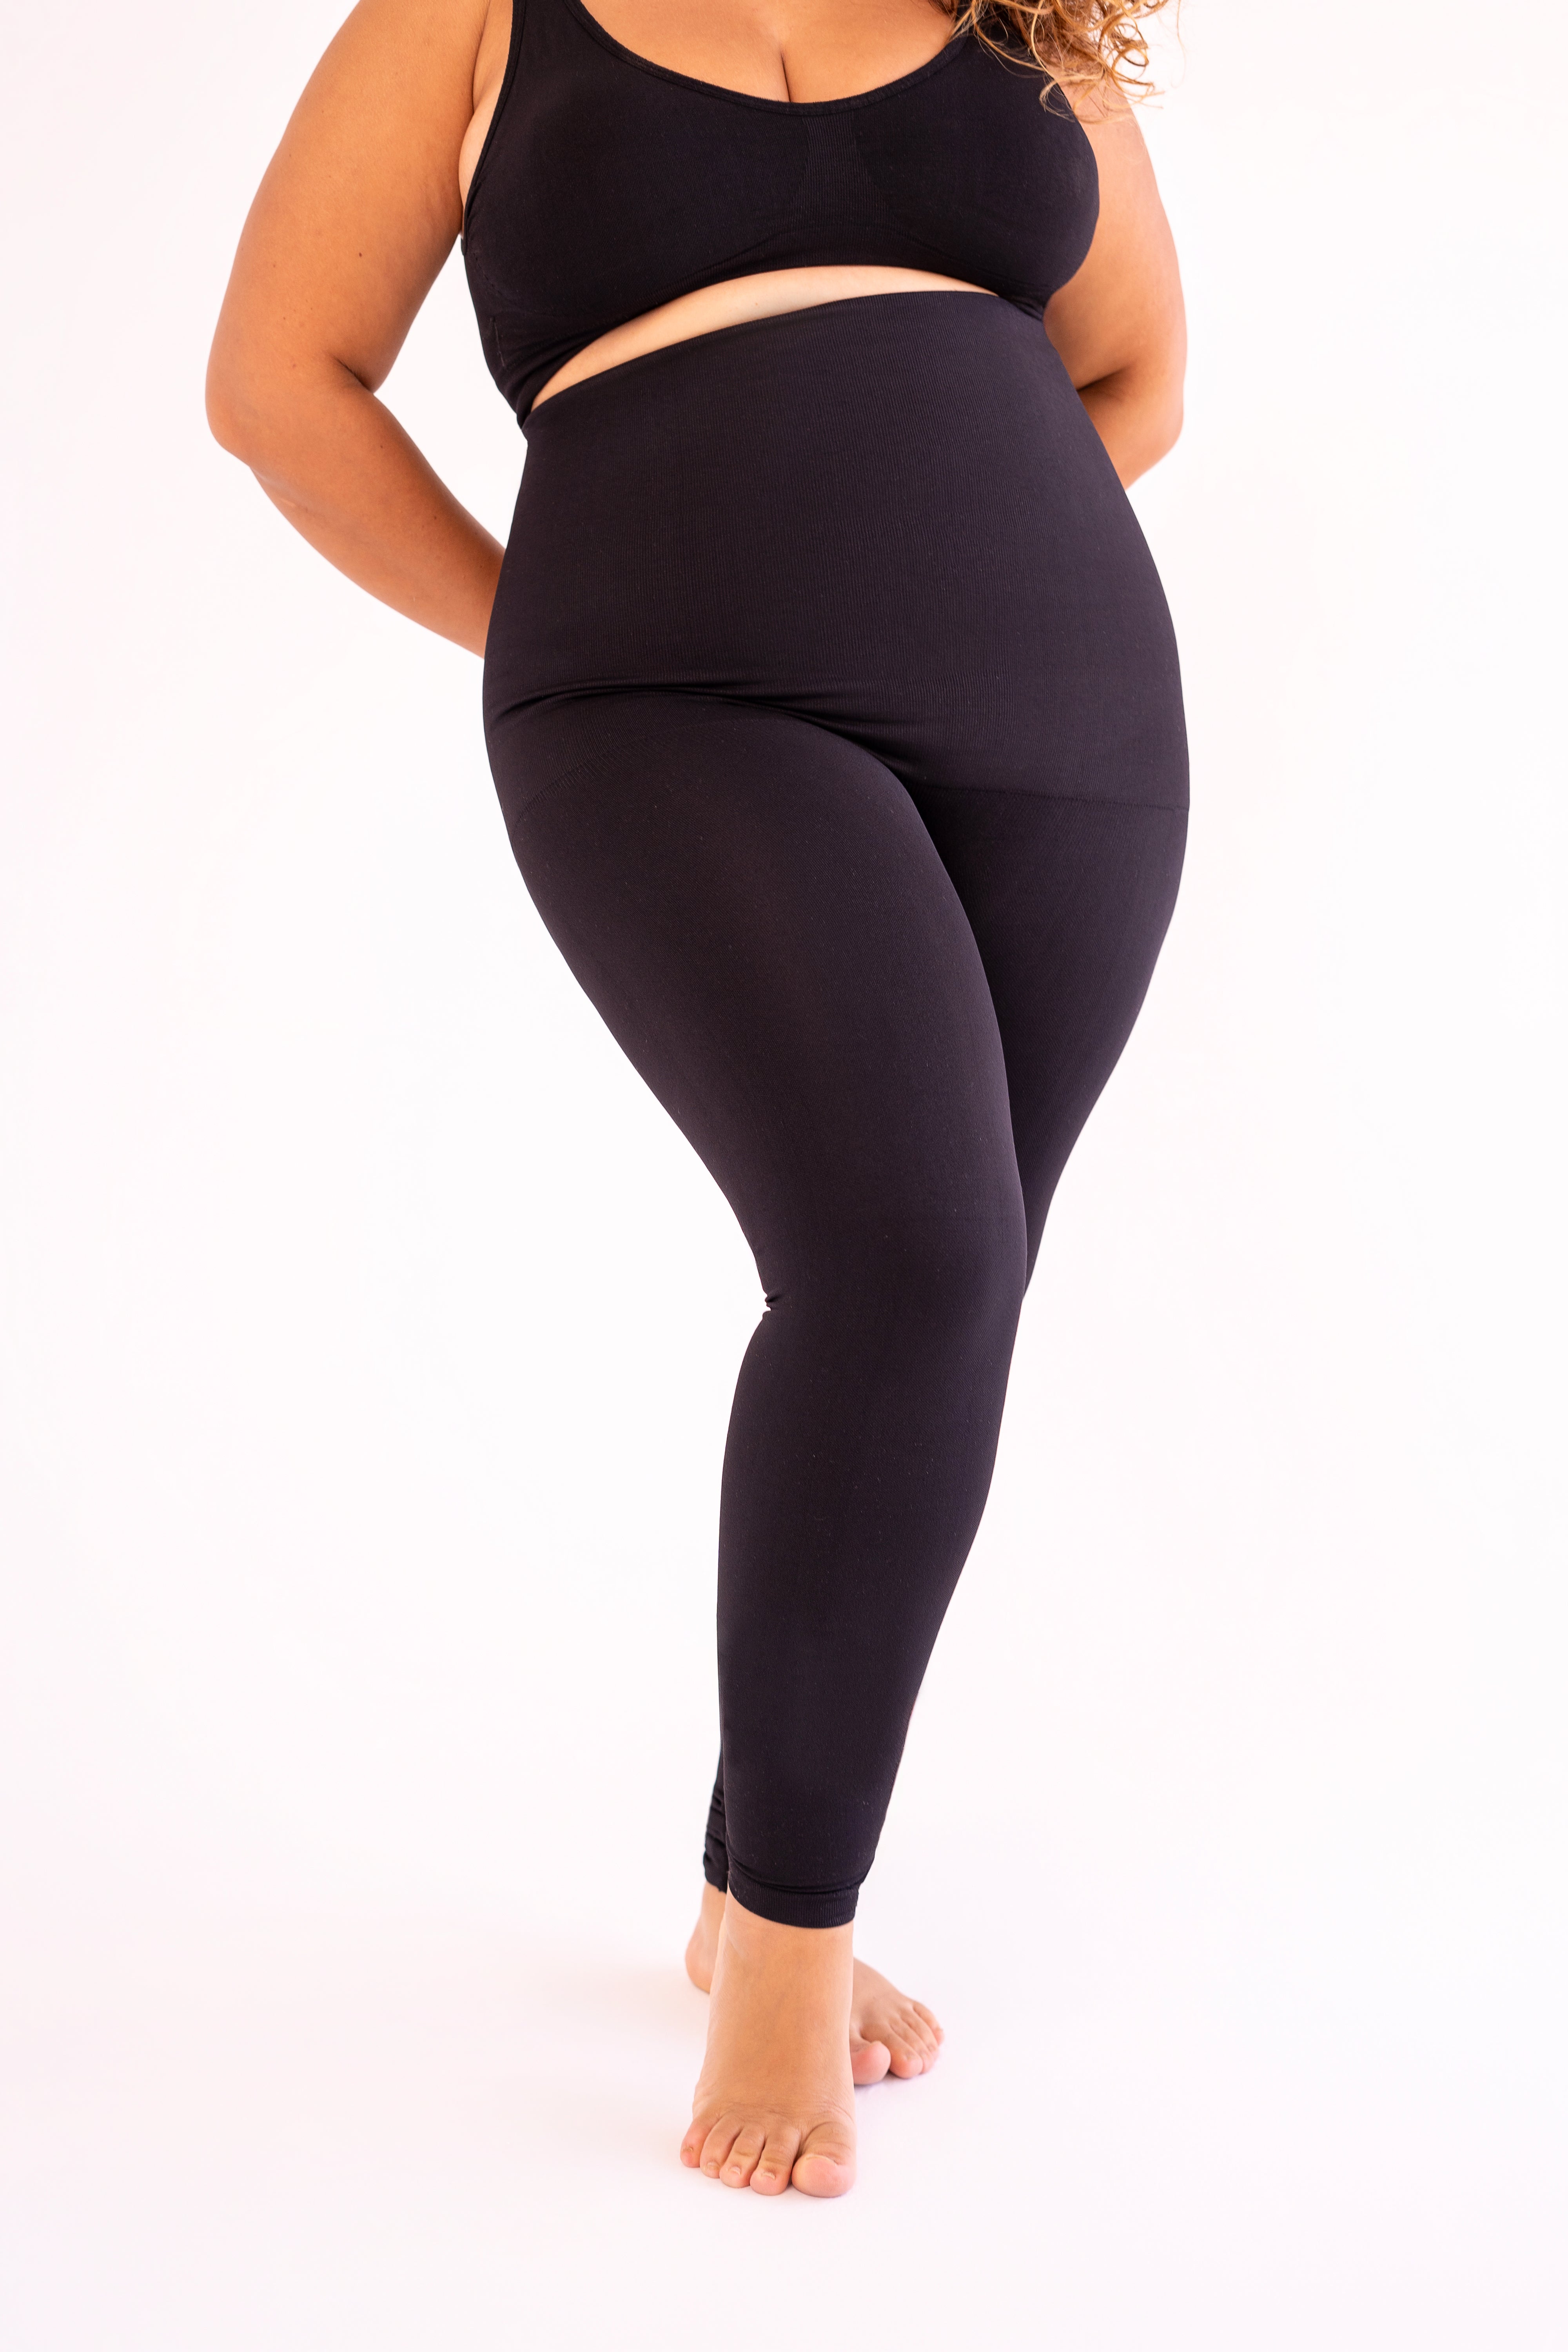 Shapermint Essentials BLACK High Waisted Shaping Leggings size 2XL